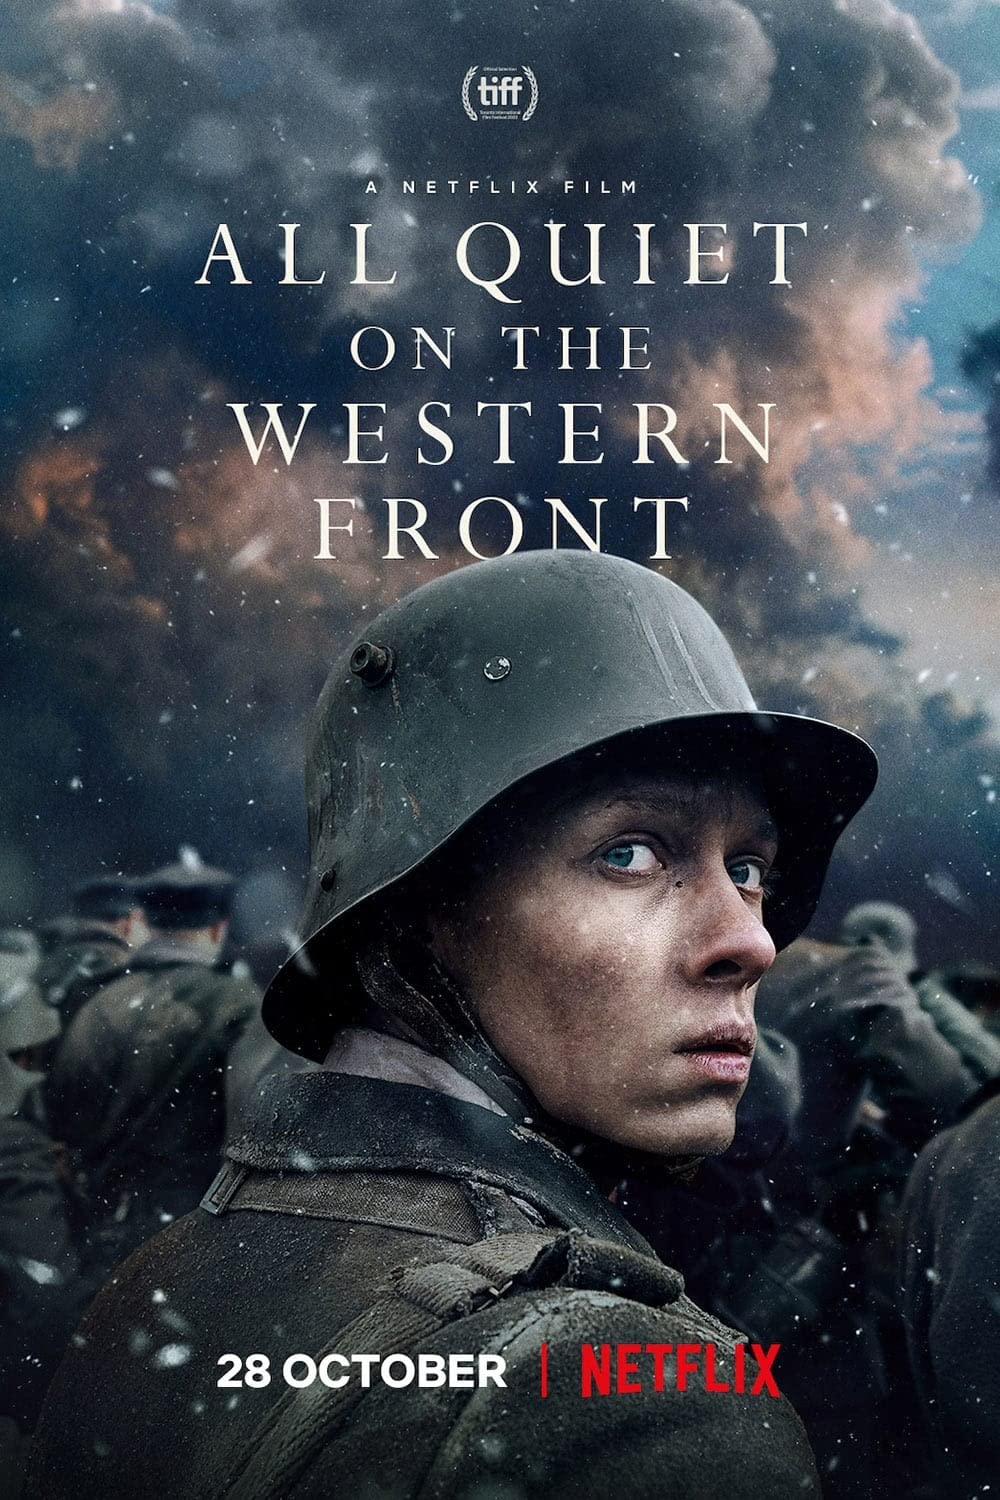 All Quiet on the Western Front Movie (2022) Cast & Crew, Release Date, Story, Review, Poster, Trailer, Budget, Collection
